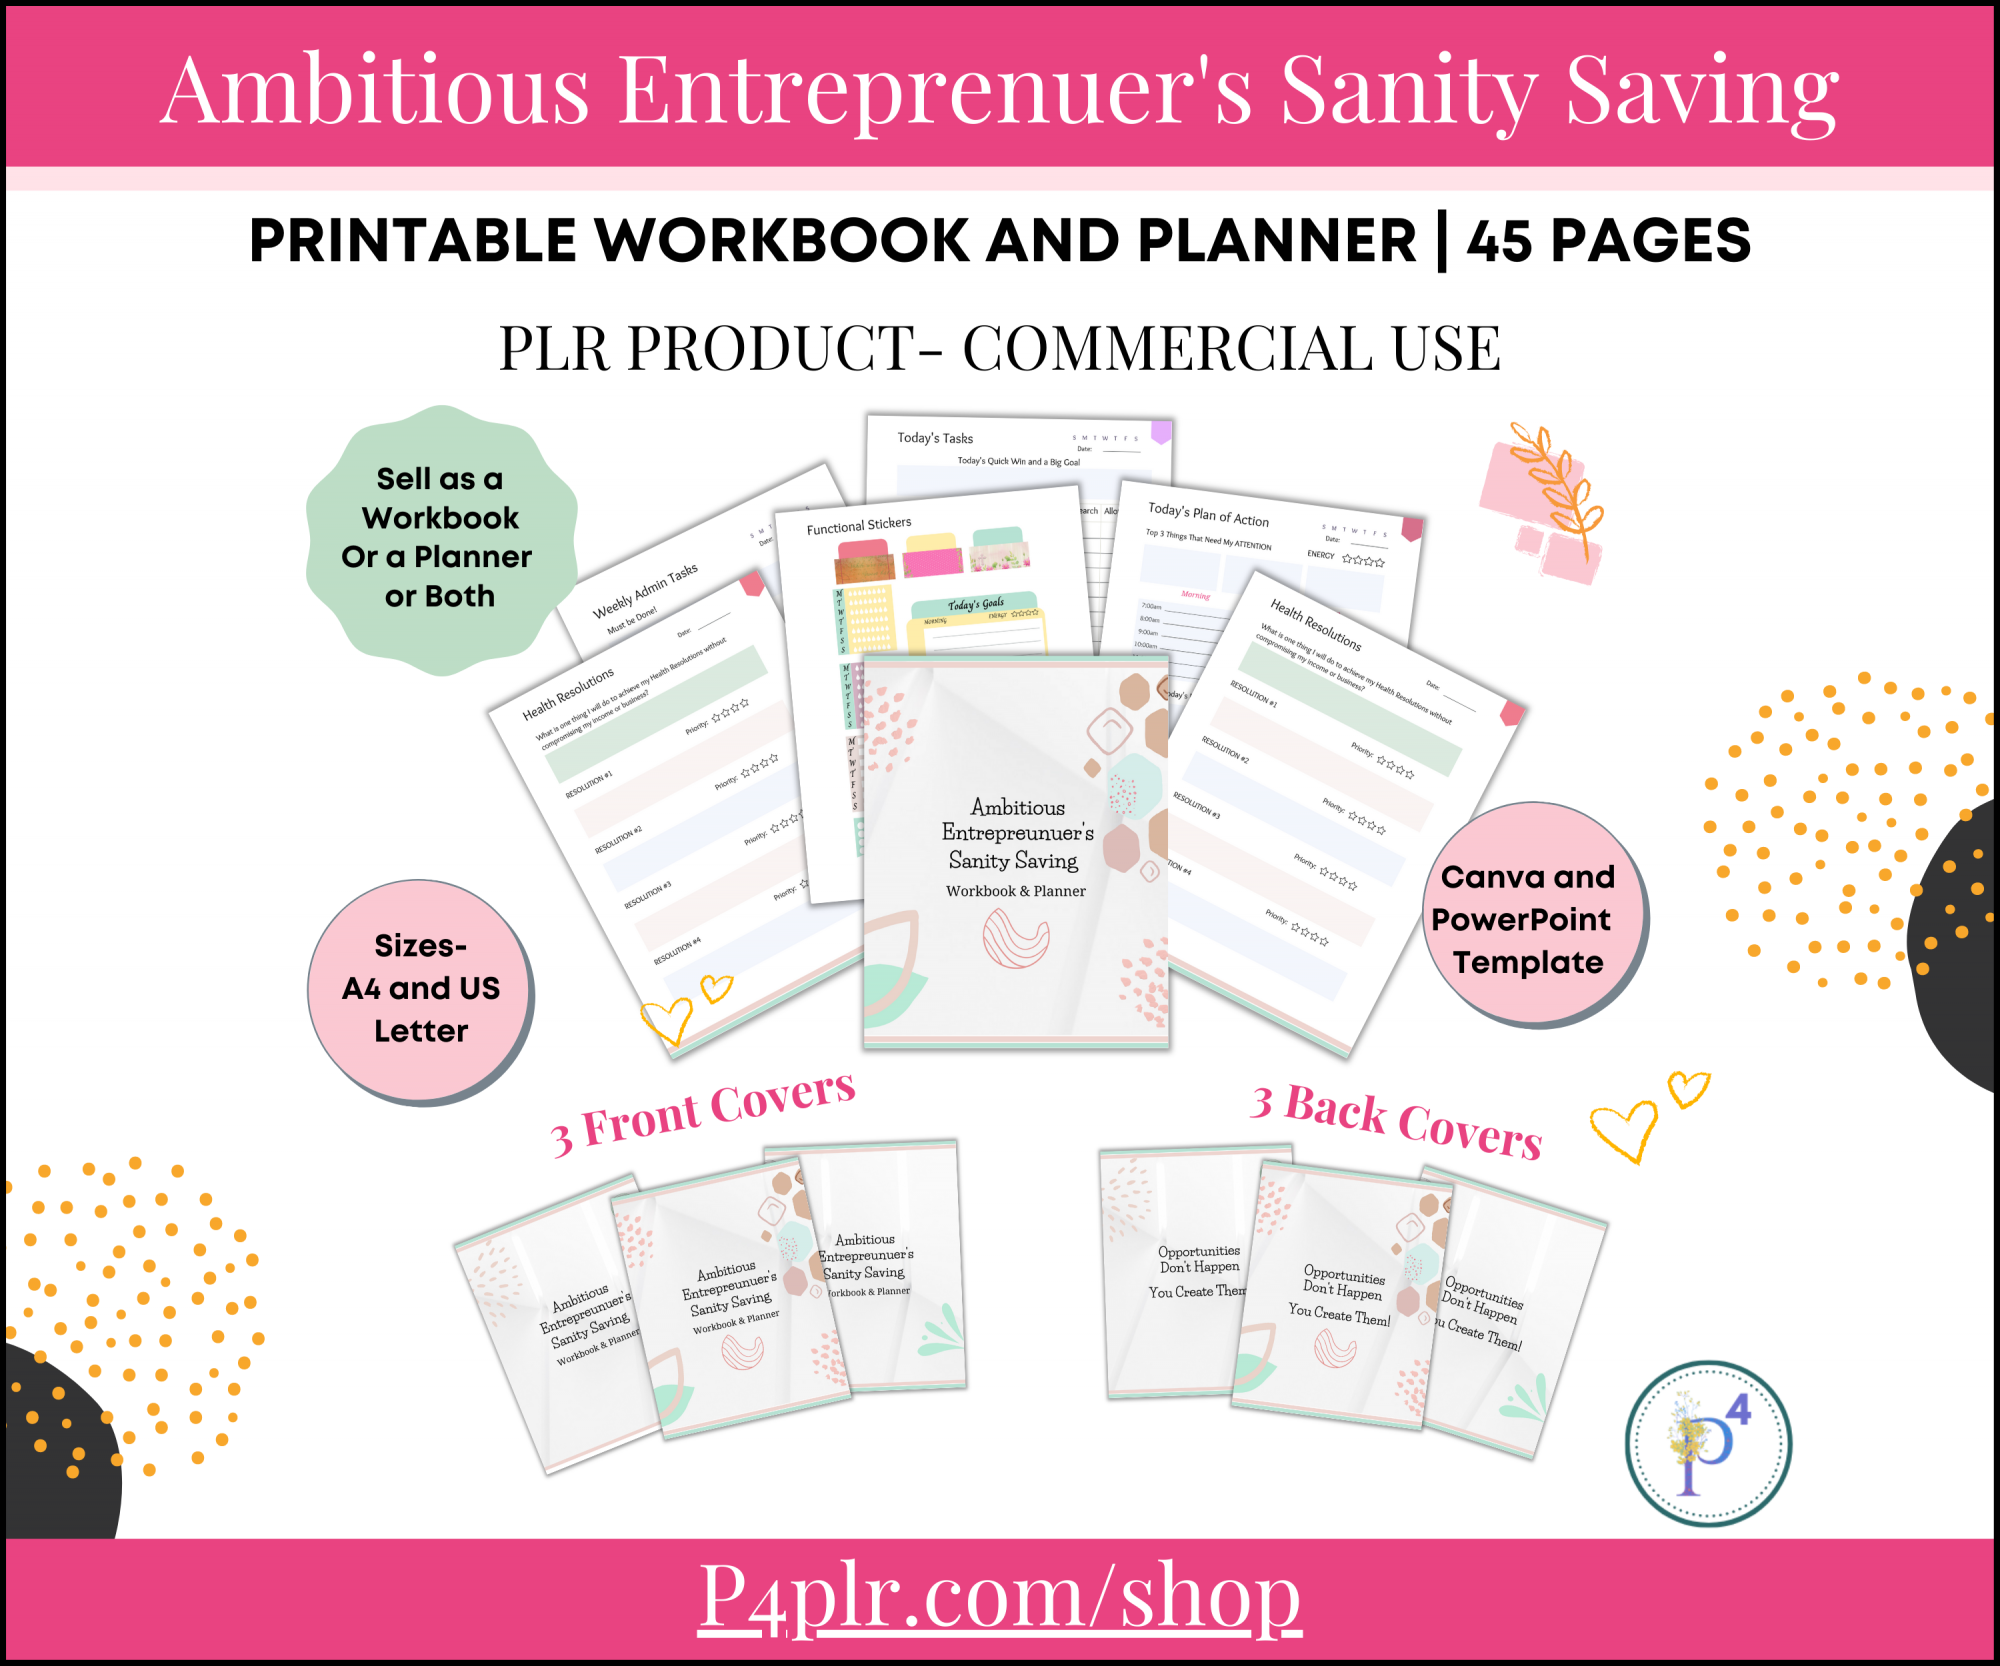 Ambitious Entrepreneur's Sanity Saving Workbook and Planner